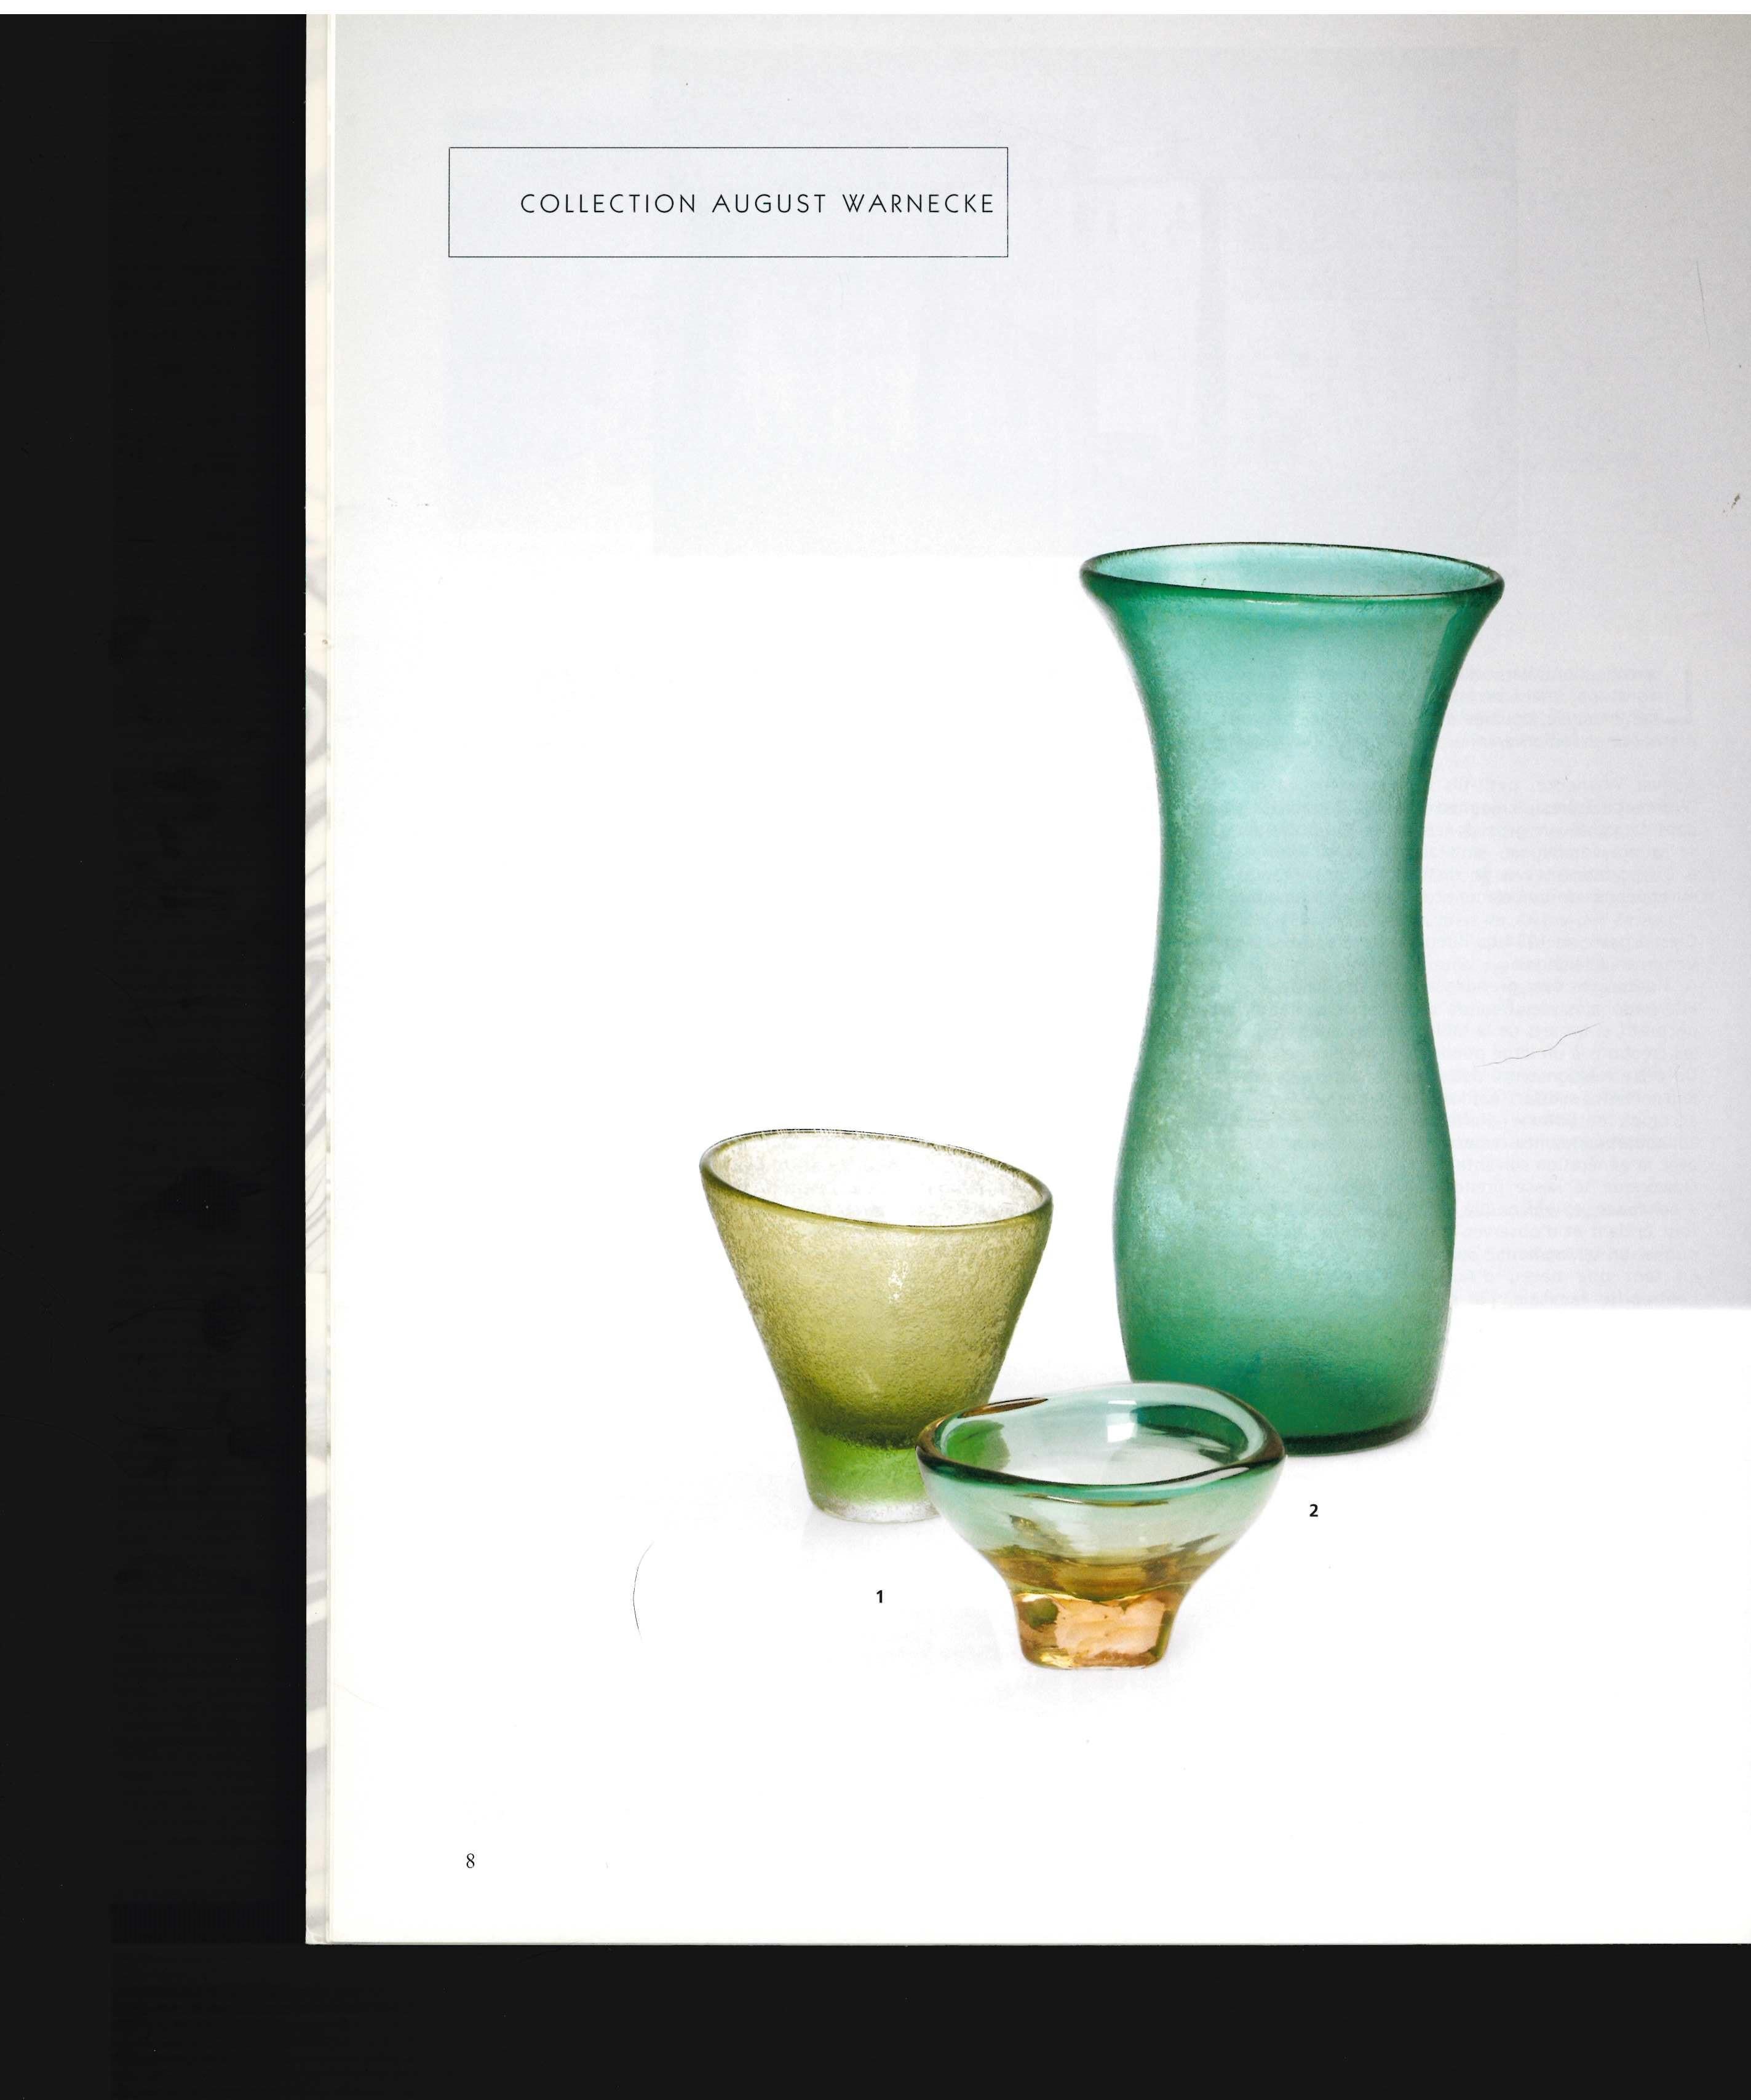 We are offering two Venini glass catalogues here, firstly there is a Christie's sale catalogue of the August Warnecke Collection dated November 2012, with 140 lots, all photographed in colour with main descriptions in French and secondary